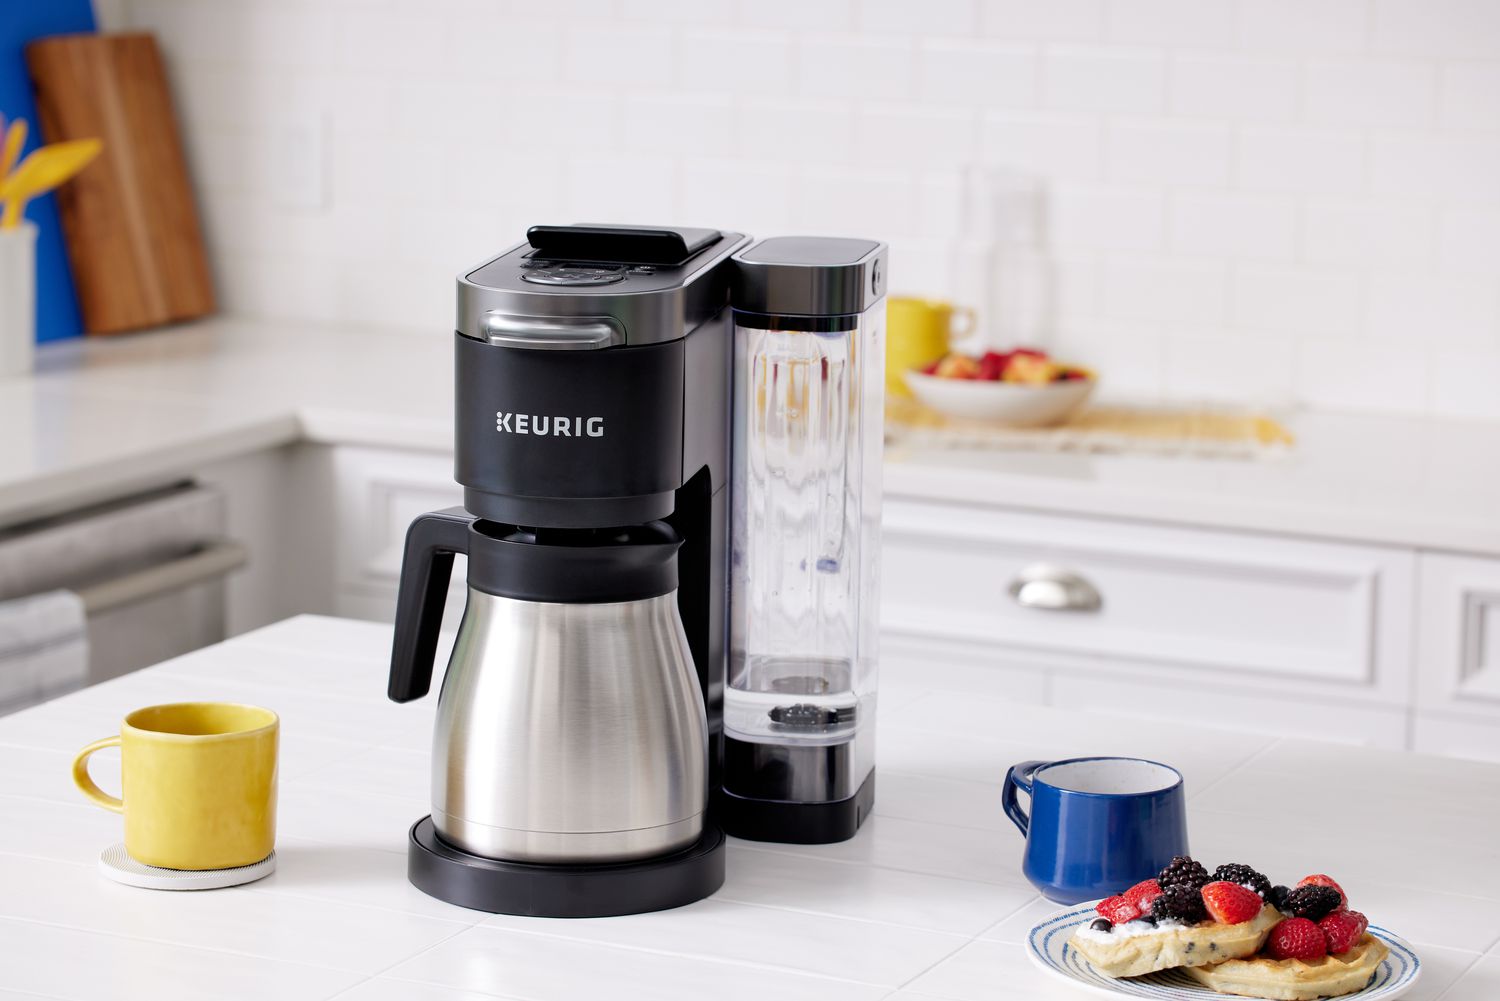 Keurig K-Duo Plus Coffee Maker on a kitchen counter next to a coffee mug and a plate with waffles and berries